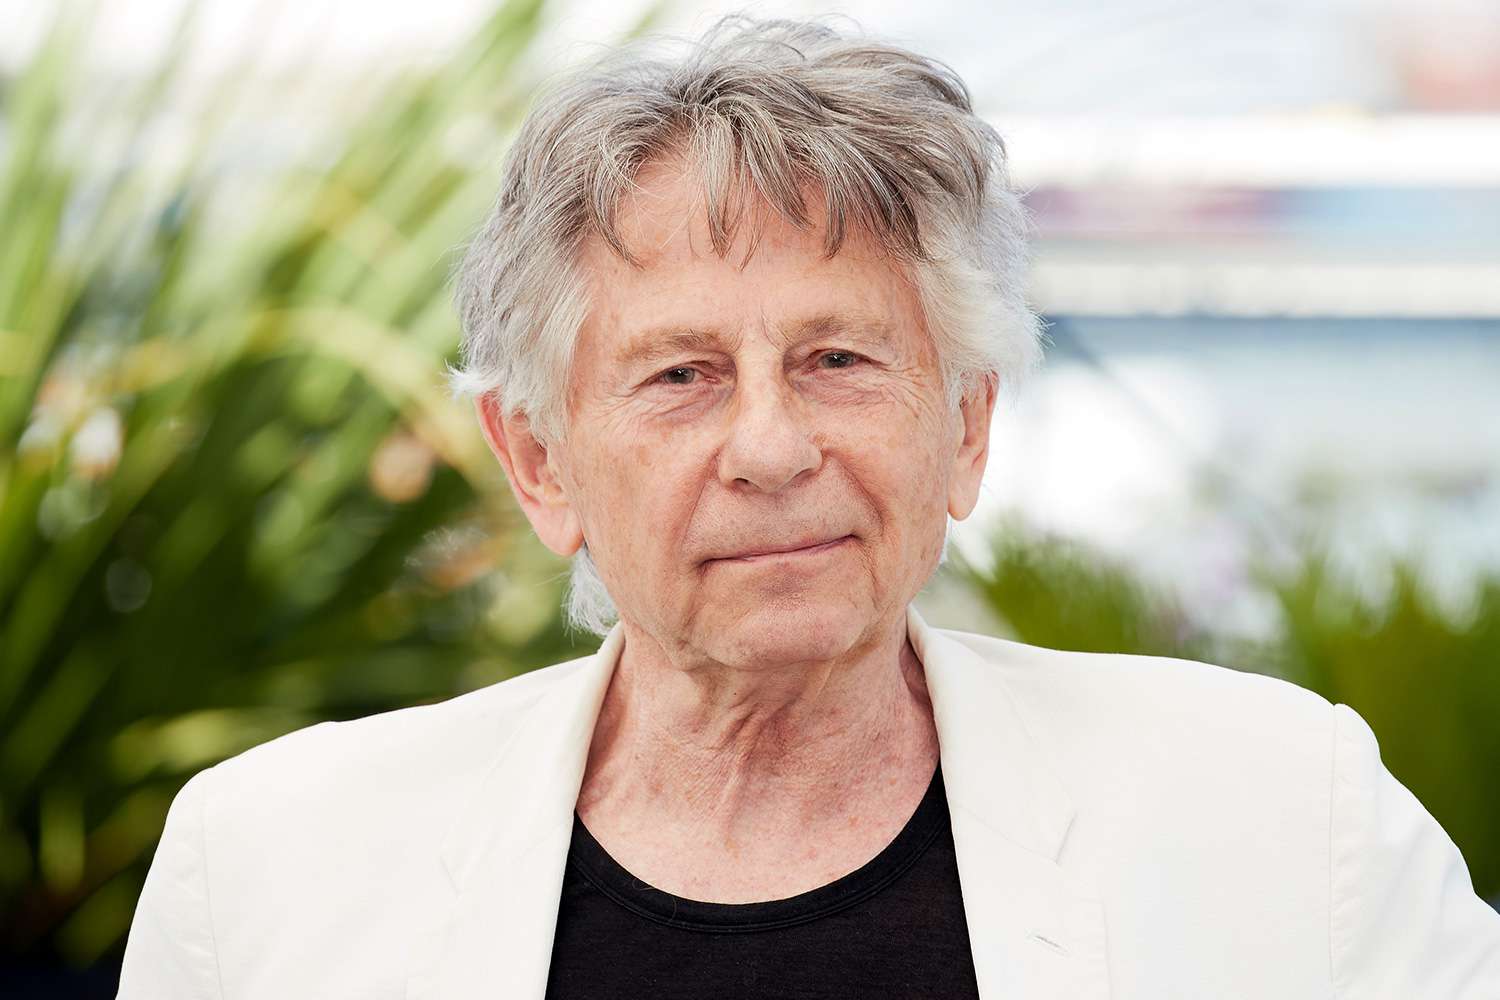 Roman Polanski attends the "Based On A True Story" photocall during the 70th annual Cannes Film Festival at Palais des Festivals on May 27, 2017 in Cannes, France